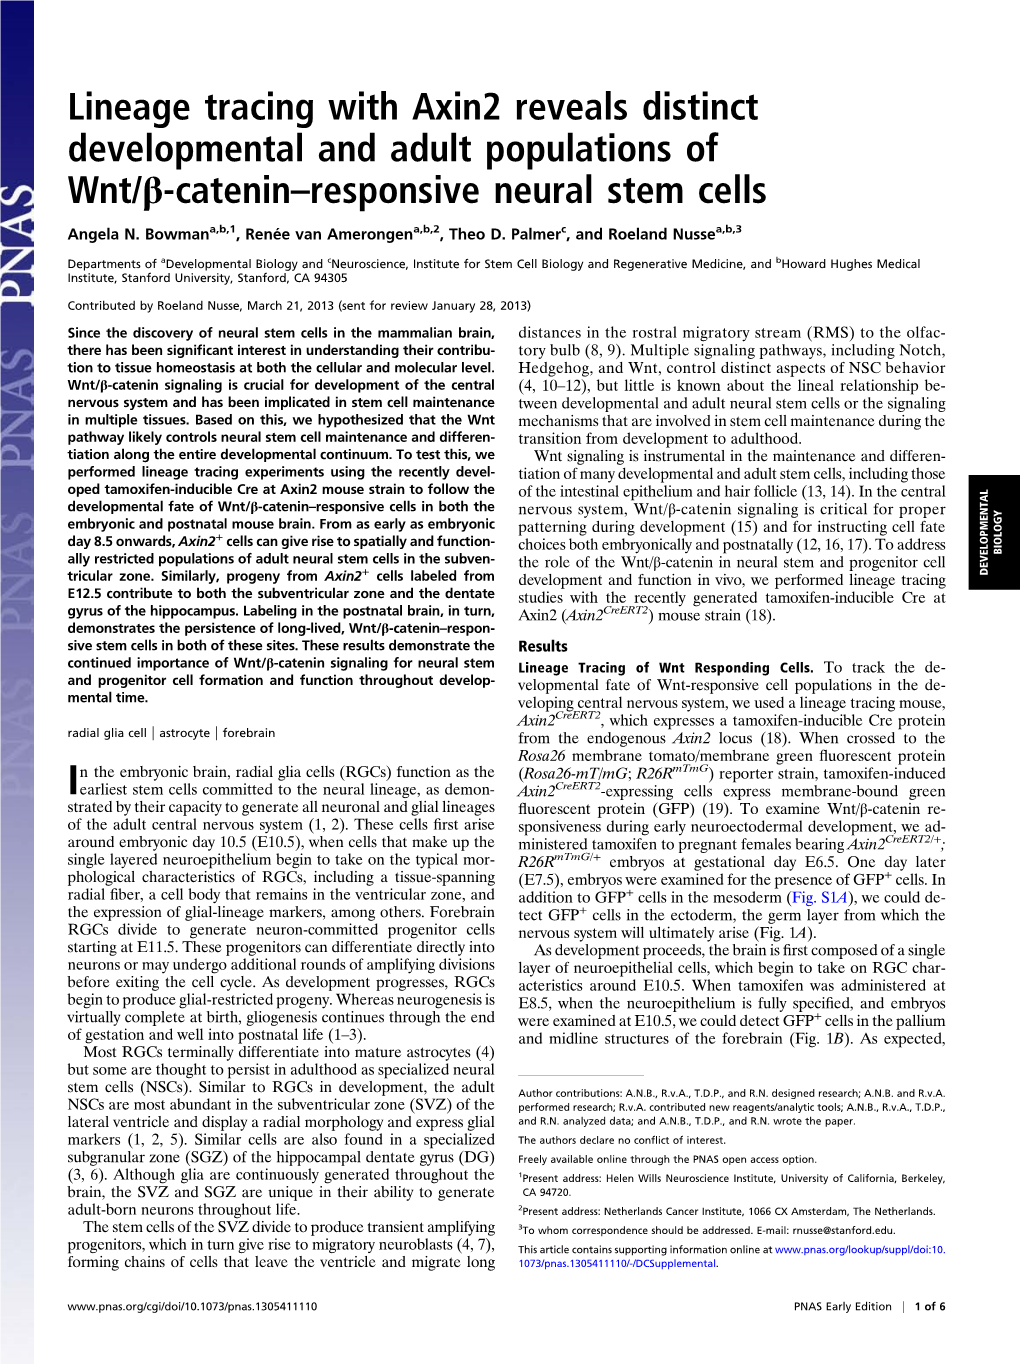 Lineage Tracing with Axin2 Reveals Distinct Developmental and Adult Populations of Wnt/Β-Catenin–Responsive Neural Stem Cells